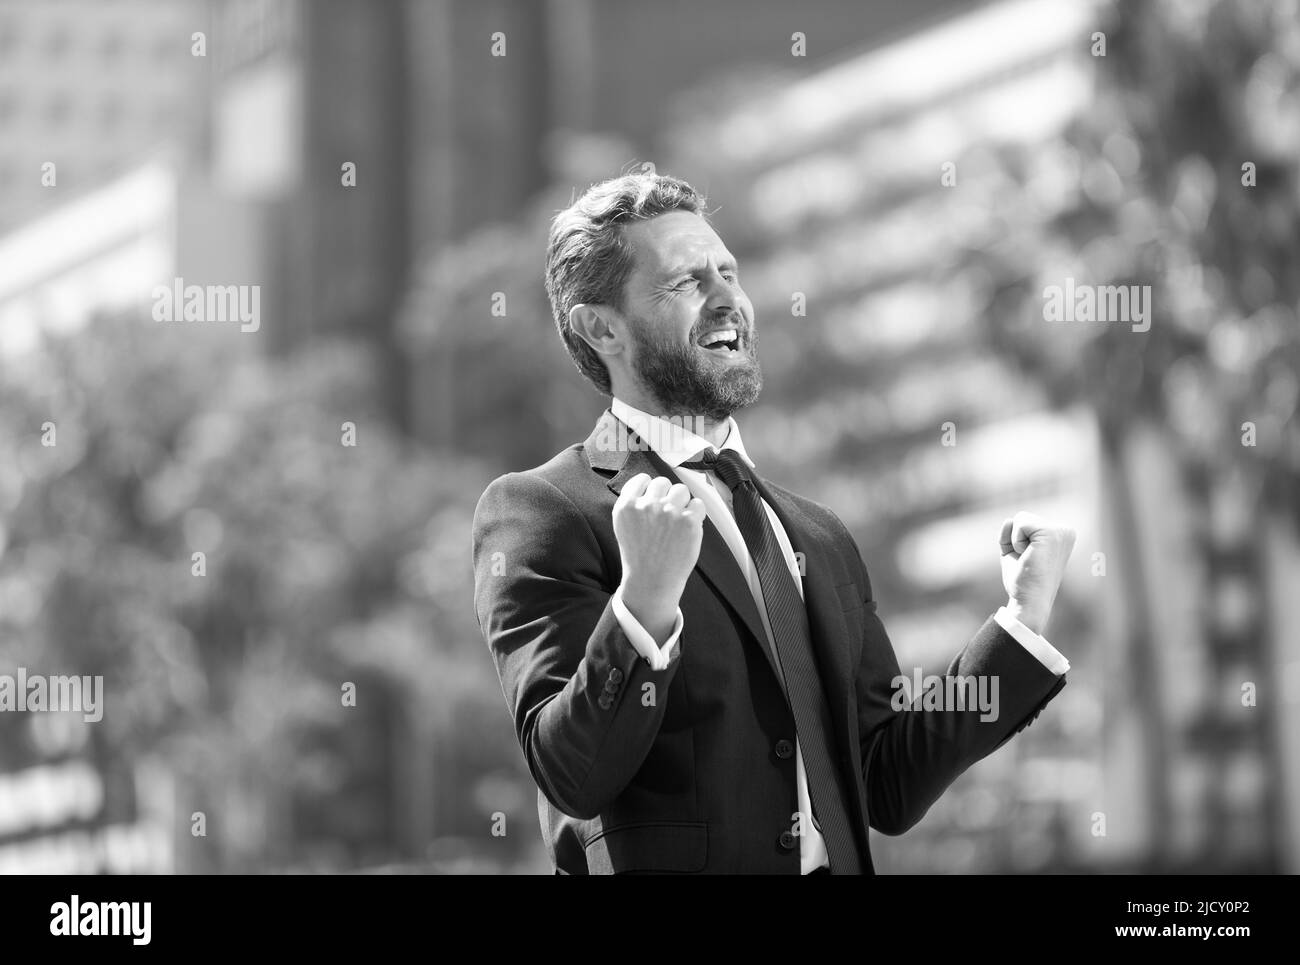 successful boss in suit. excited entrepreneur. business excitement. Stock Photo